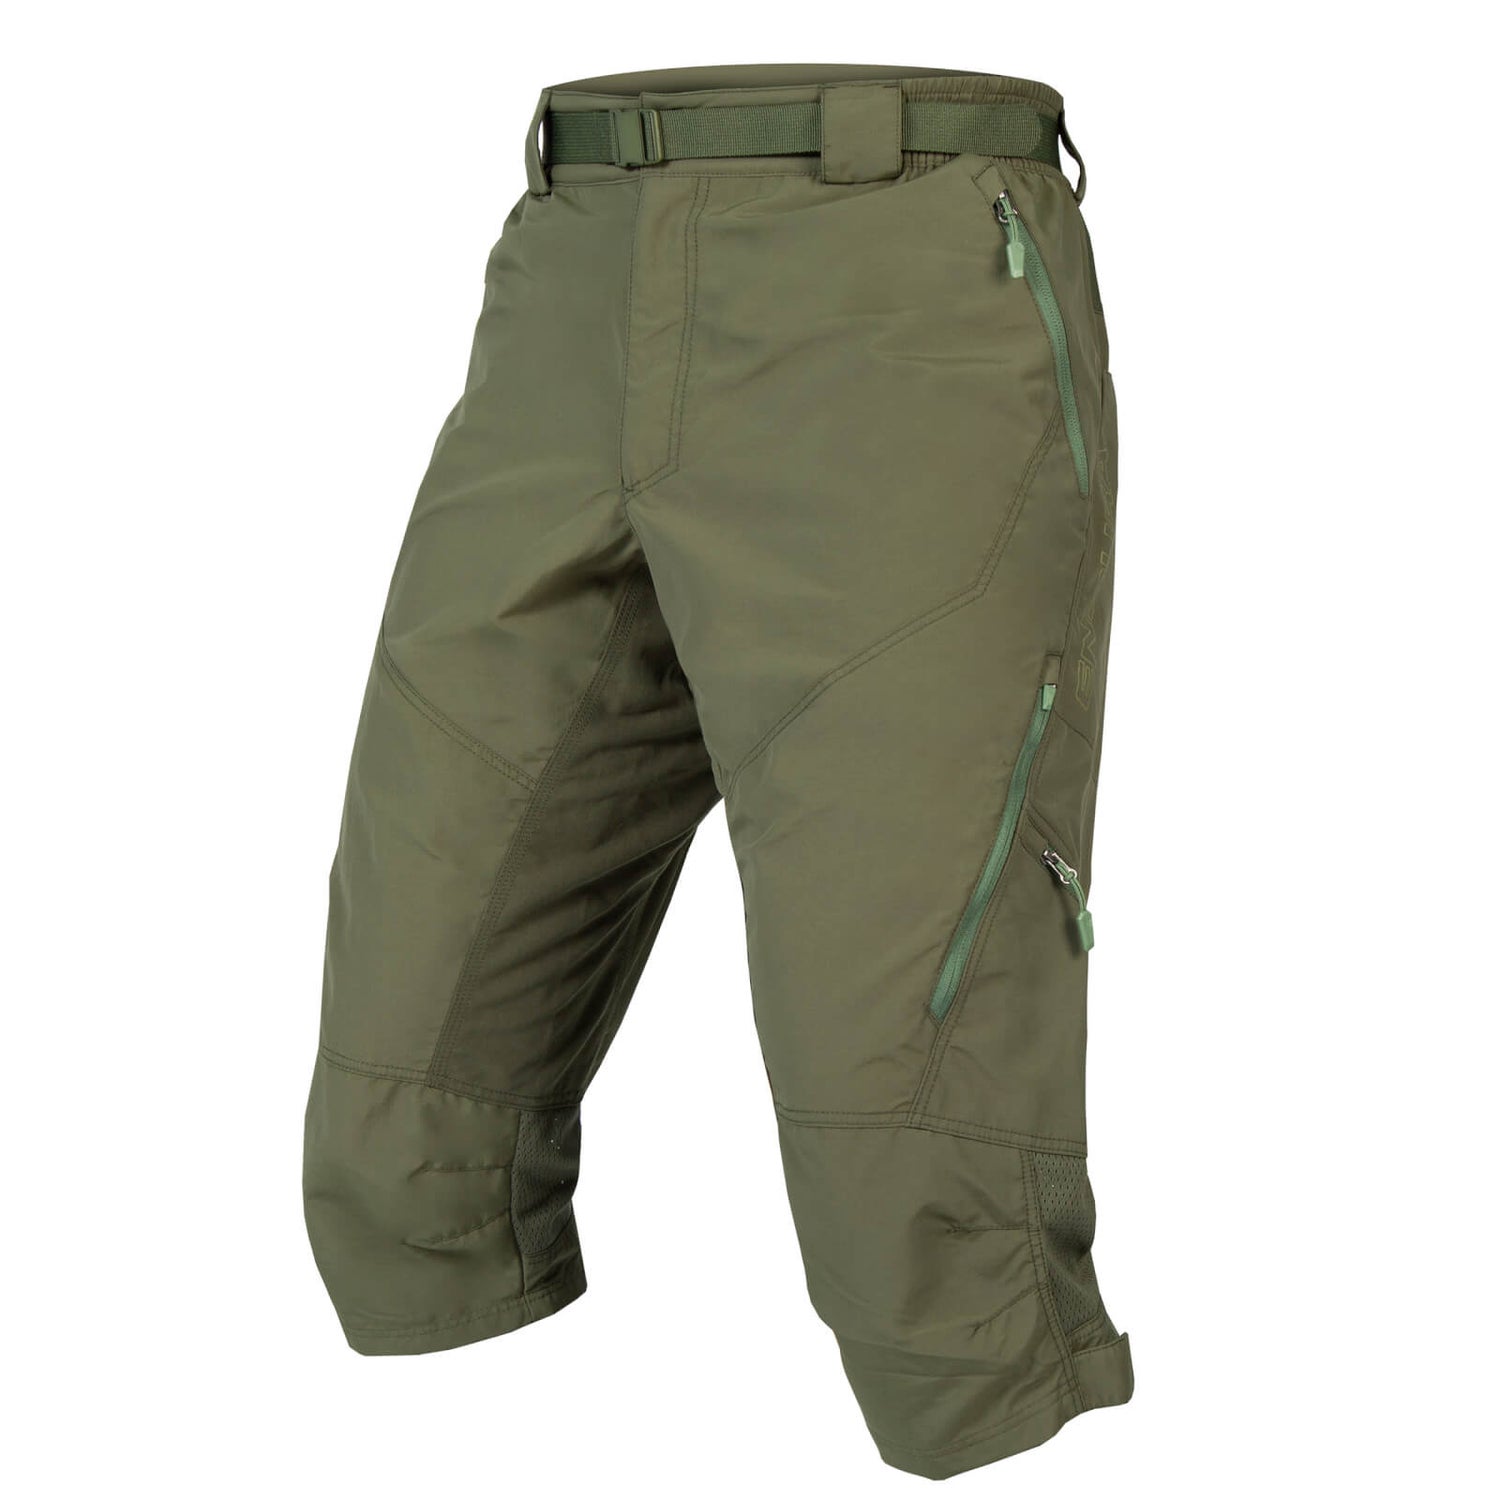 Hummvee 3/4 Short II with liner - Forest Green - XXL